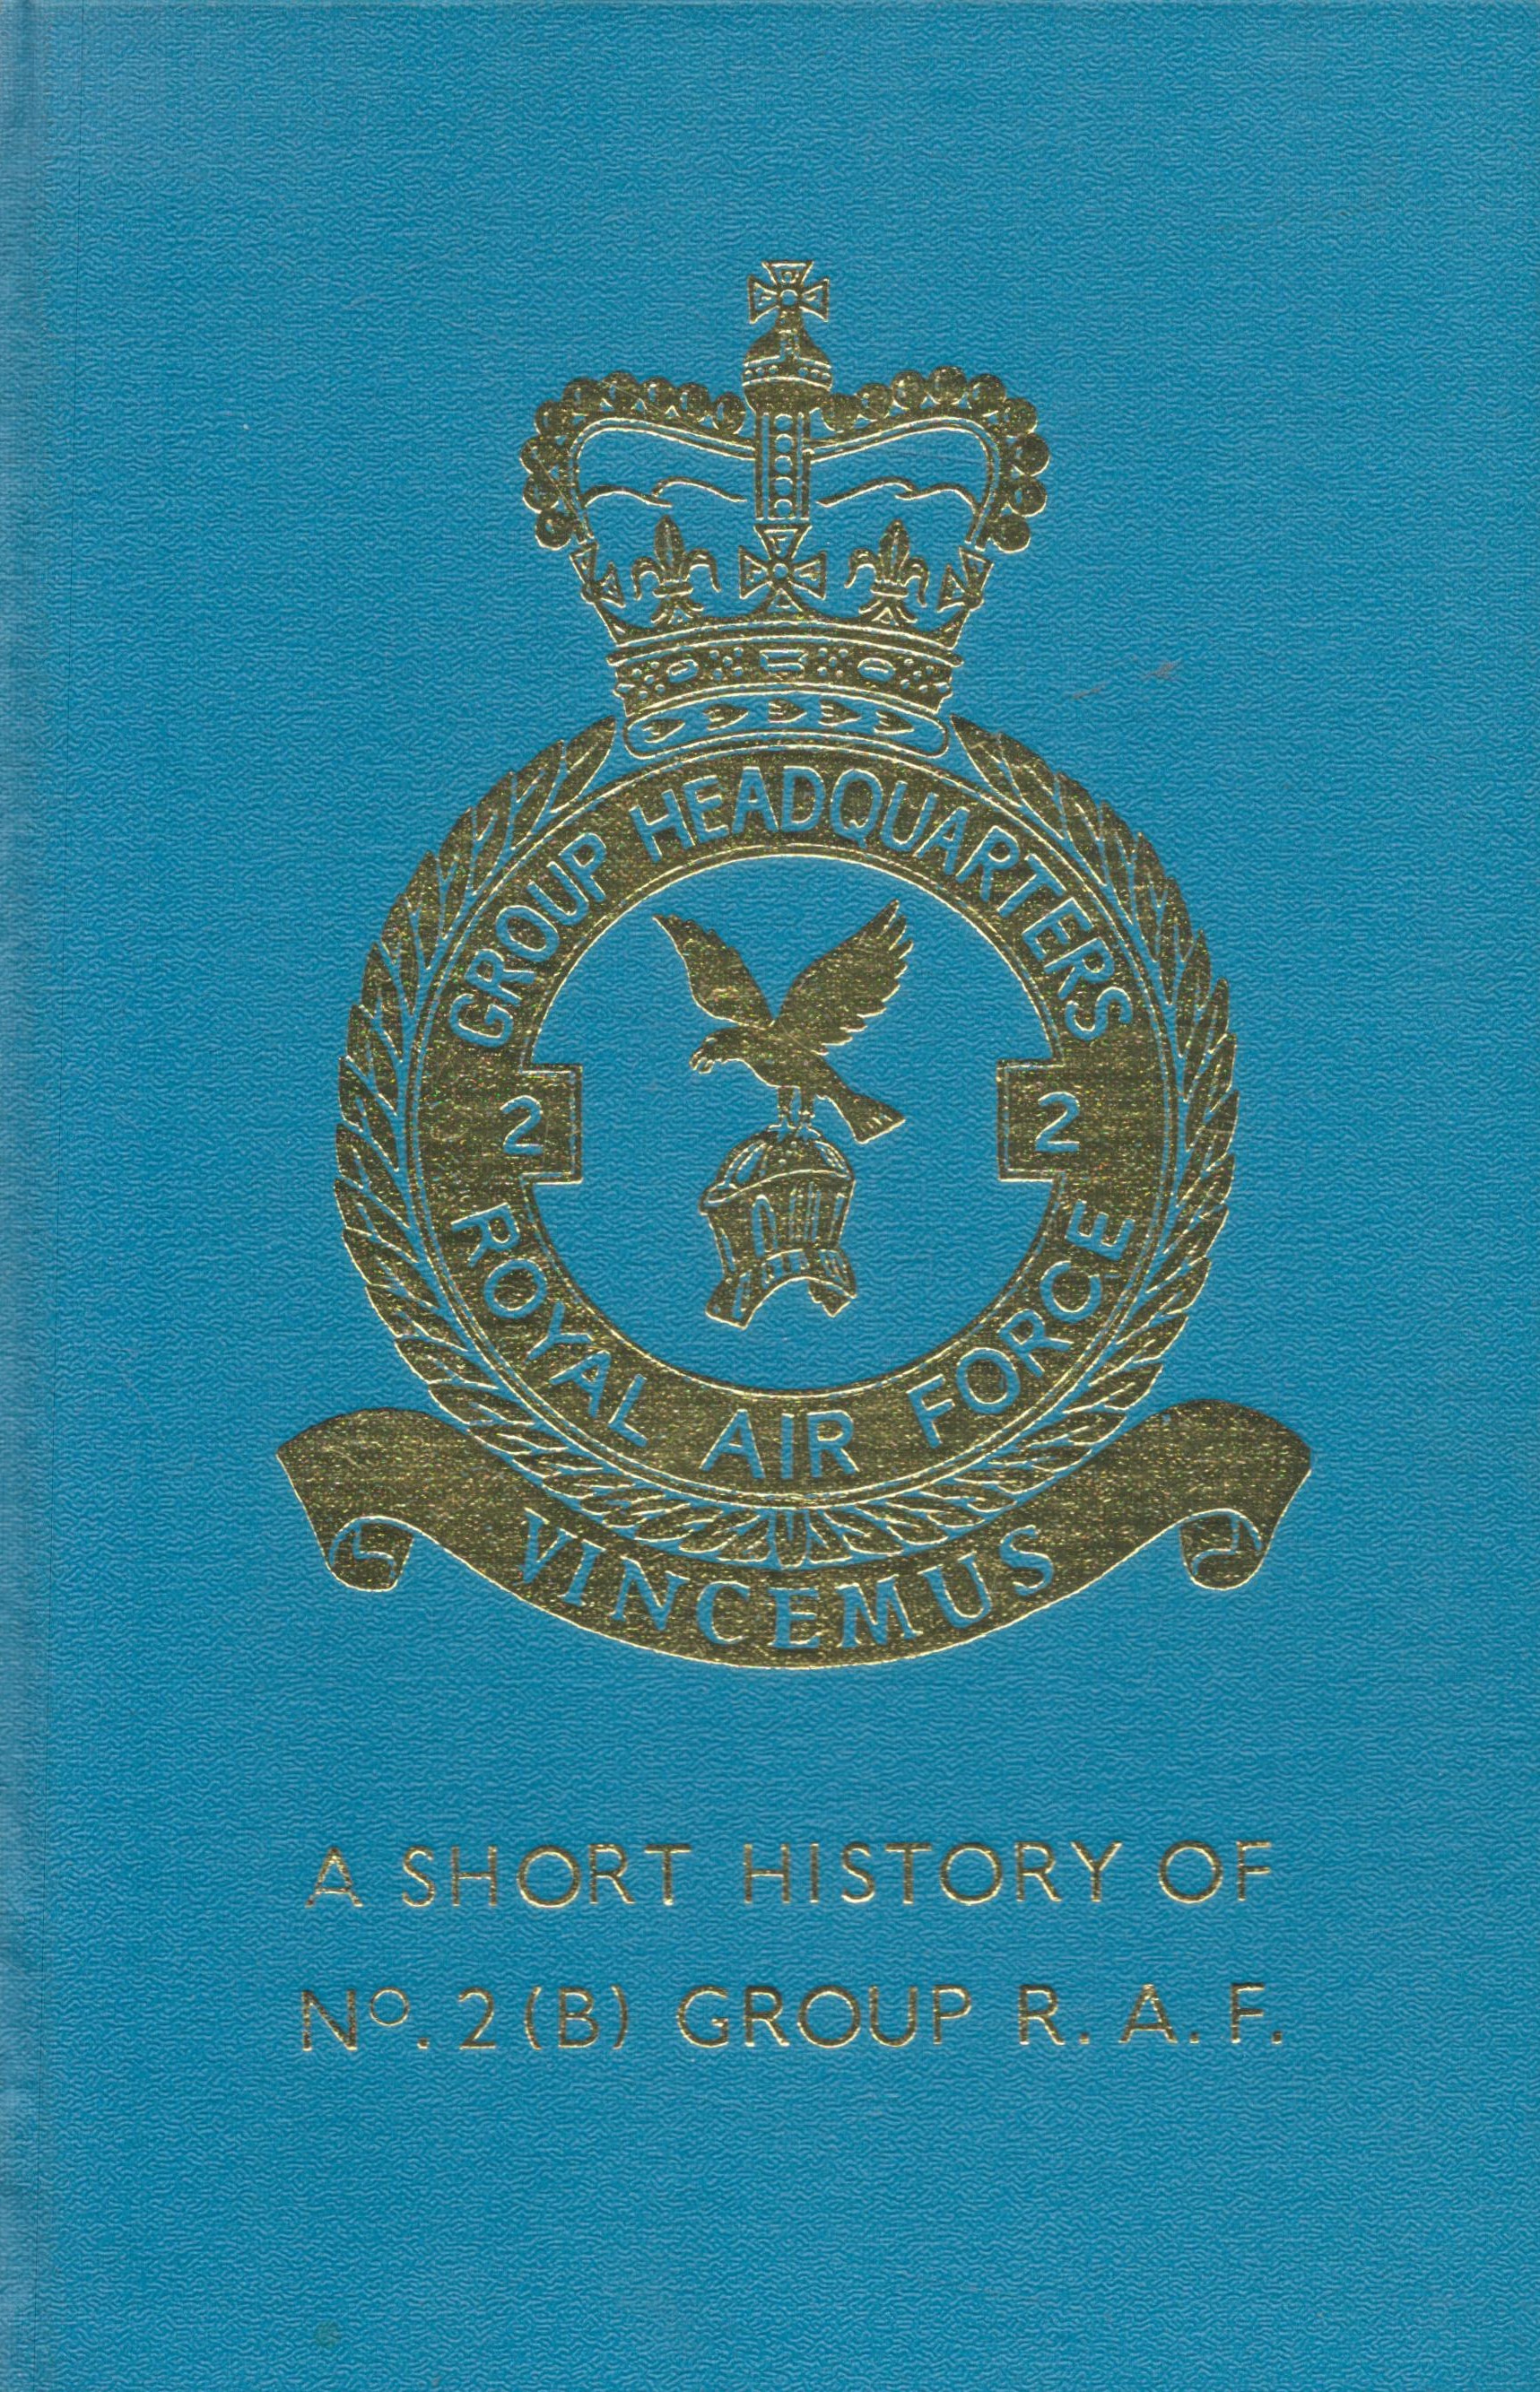 A Short History of No 2 (B) Group R.A.F. compiled by Leslie Hunt Hardback Book printed by Essex - Image 2 of 6